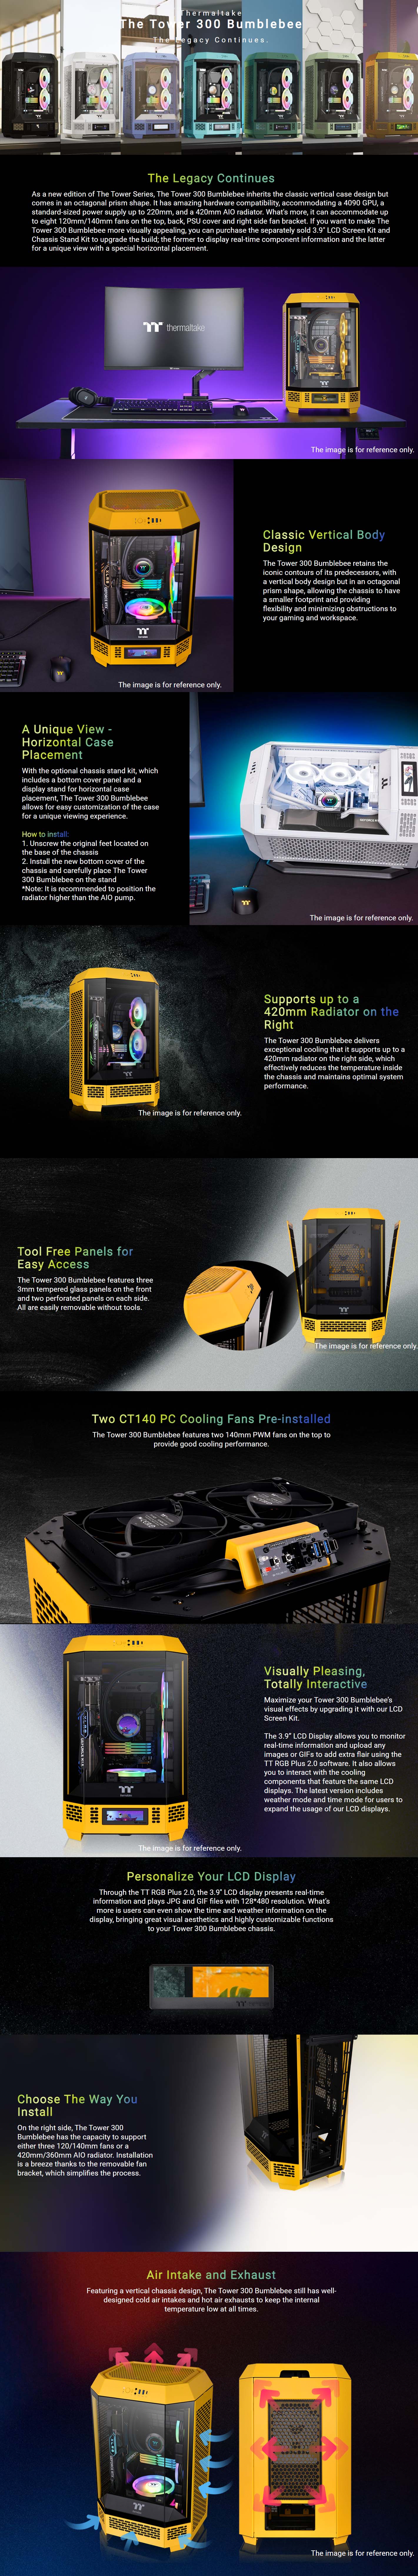 Thermaltake-Cases-Thermaltake-The-Tower-300-Tempered-Glass-Micro-ATX-Tower-Case-Bumblebee-Edition-CA-1Y4-00S4WN-00-1